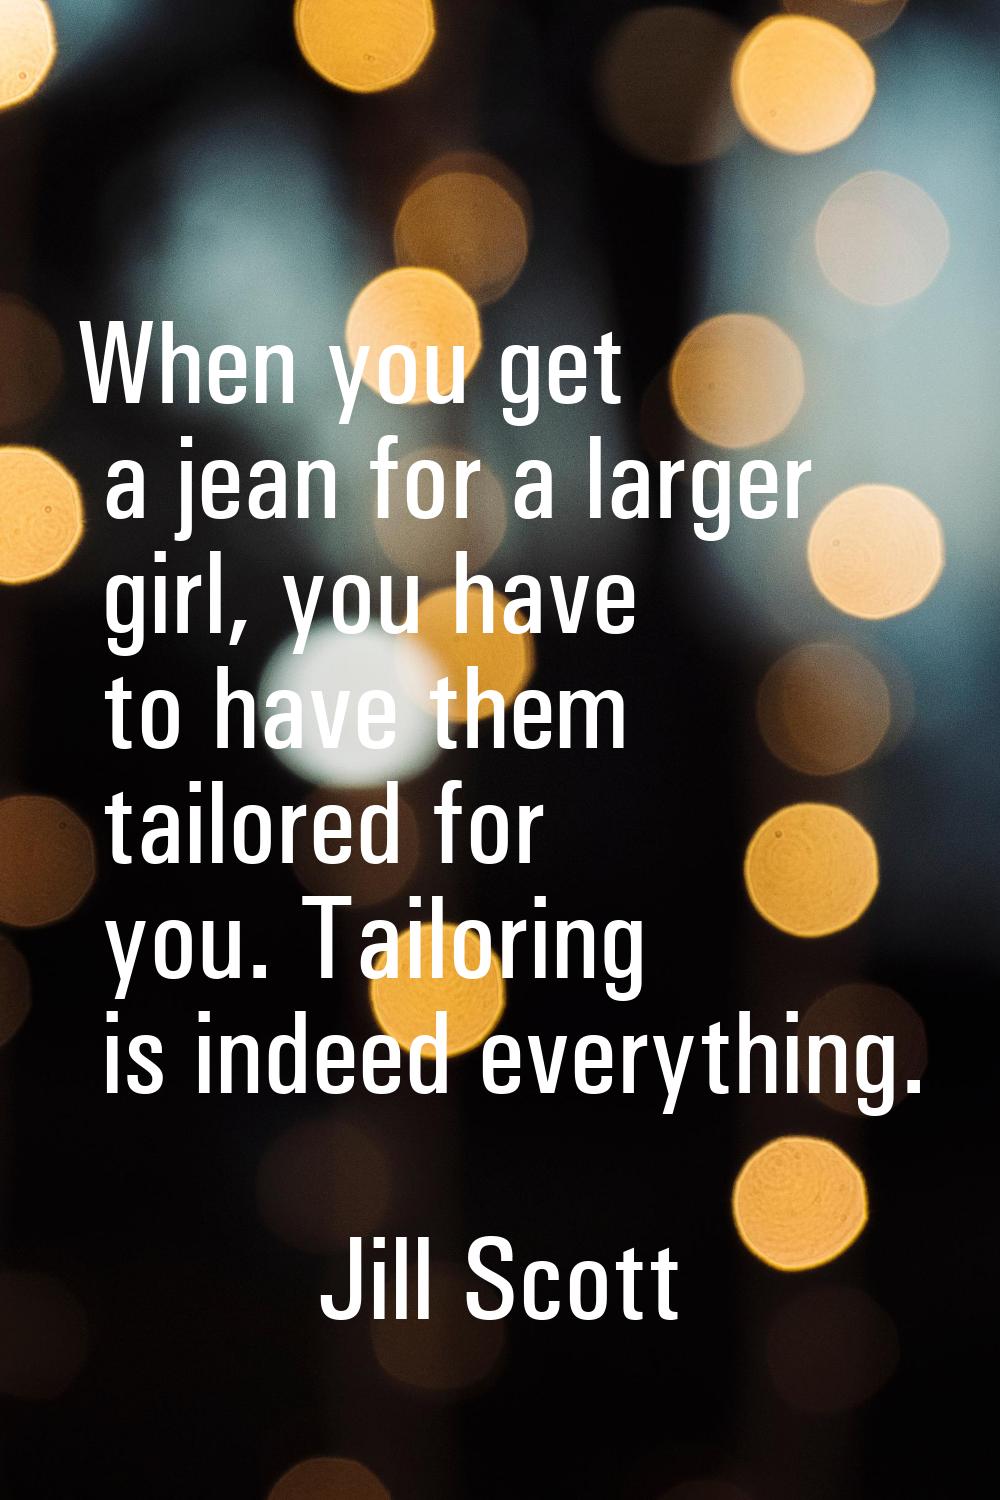 When you get a jean for a larger girl, you have to have them tailored for you. Tailoring is indeed 